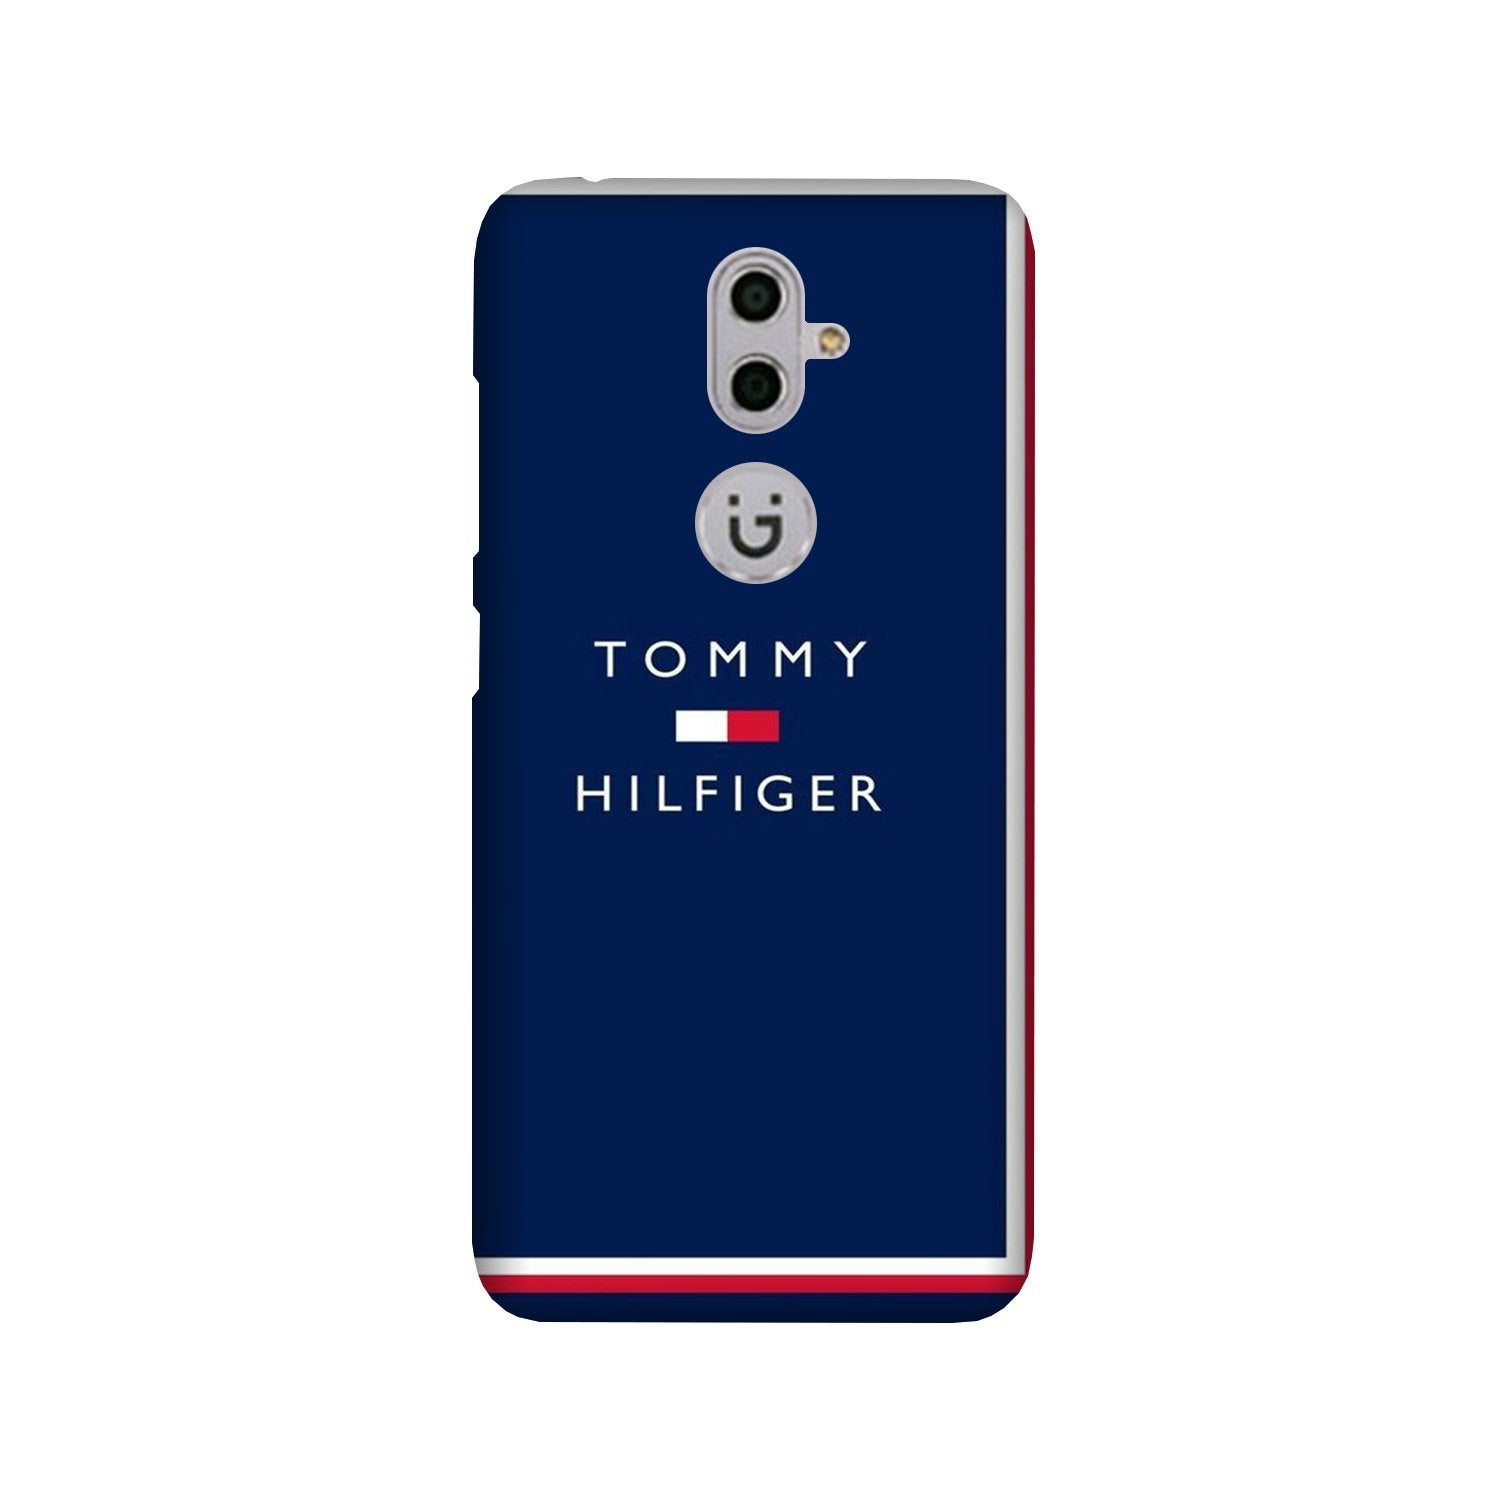 Tommy Hilfiger Case for Gionee S9 (Design No. 275)